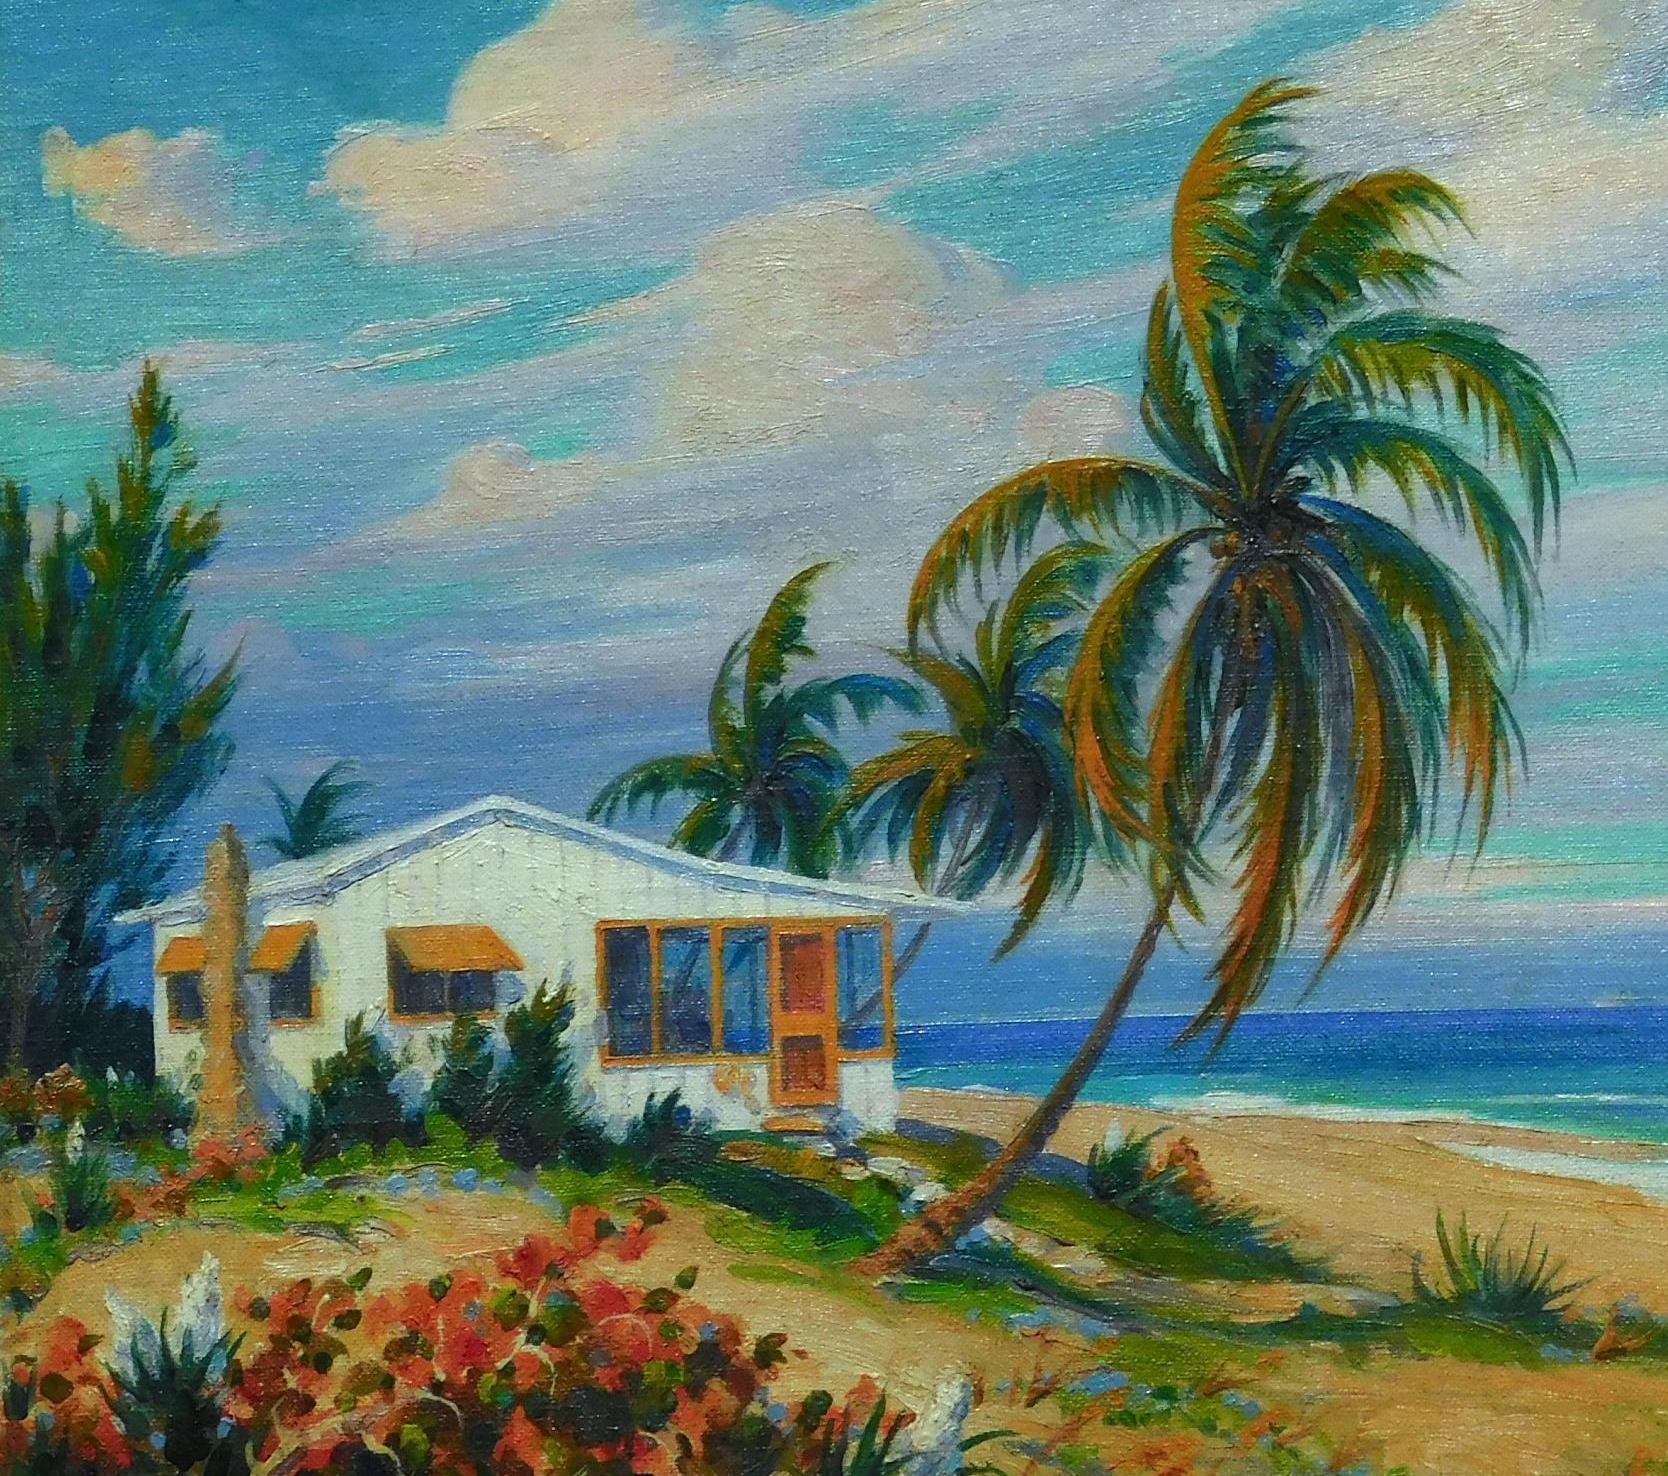 Carl Brandien Oil on Board. Florida Subject. In excellent condition.
Canvas size: 16